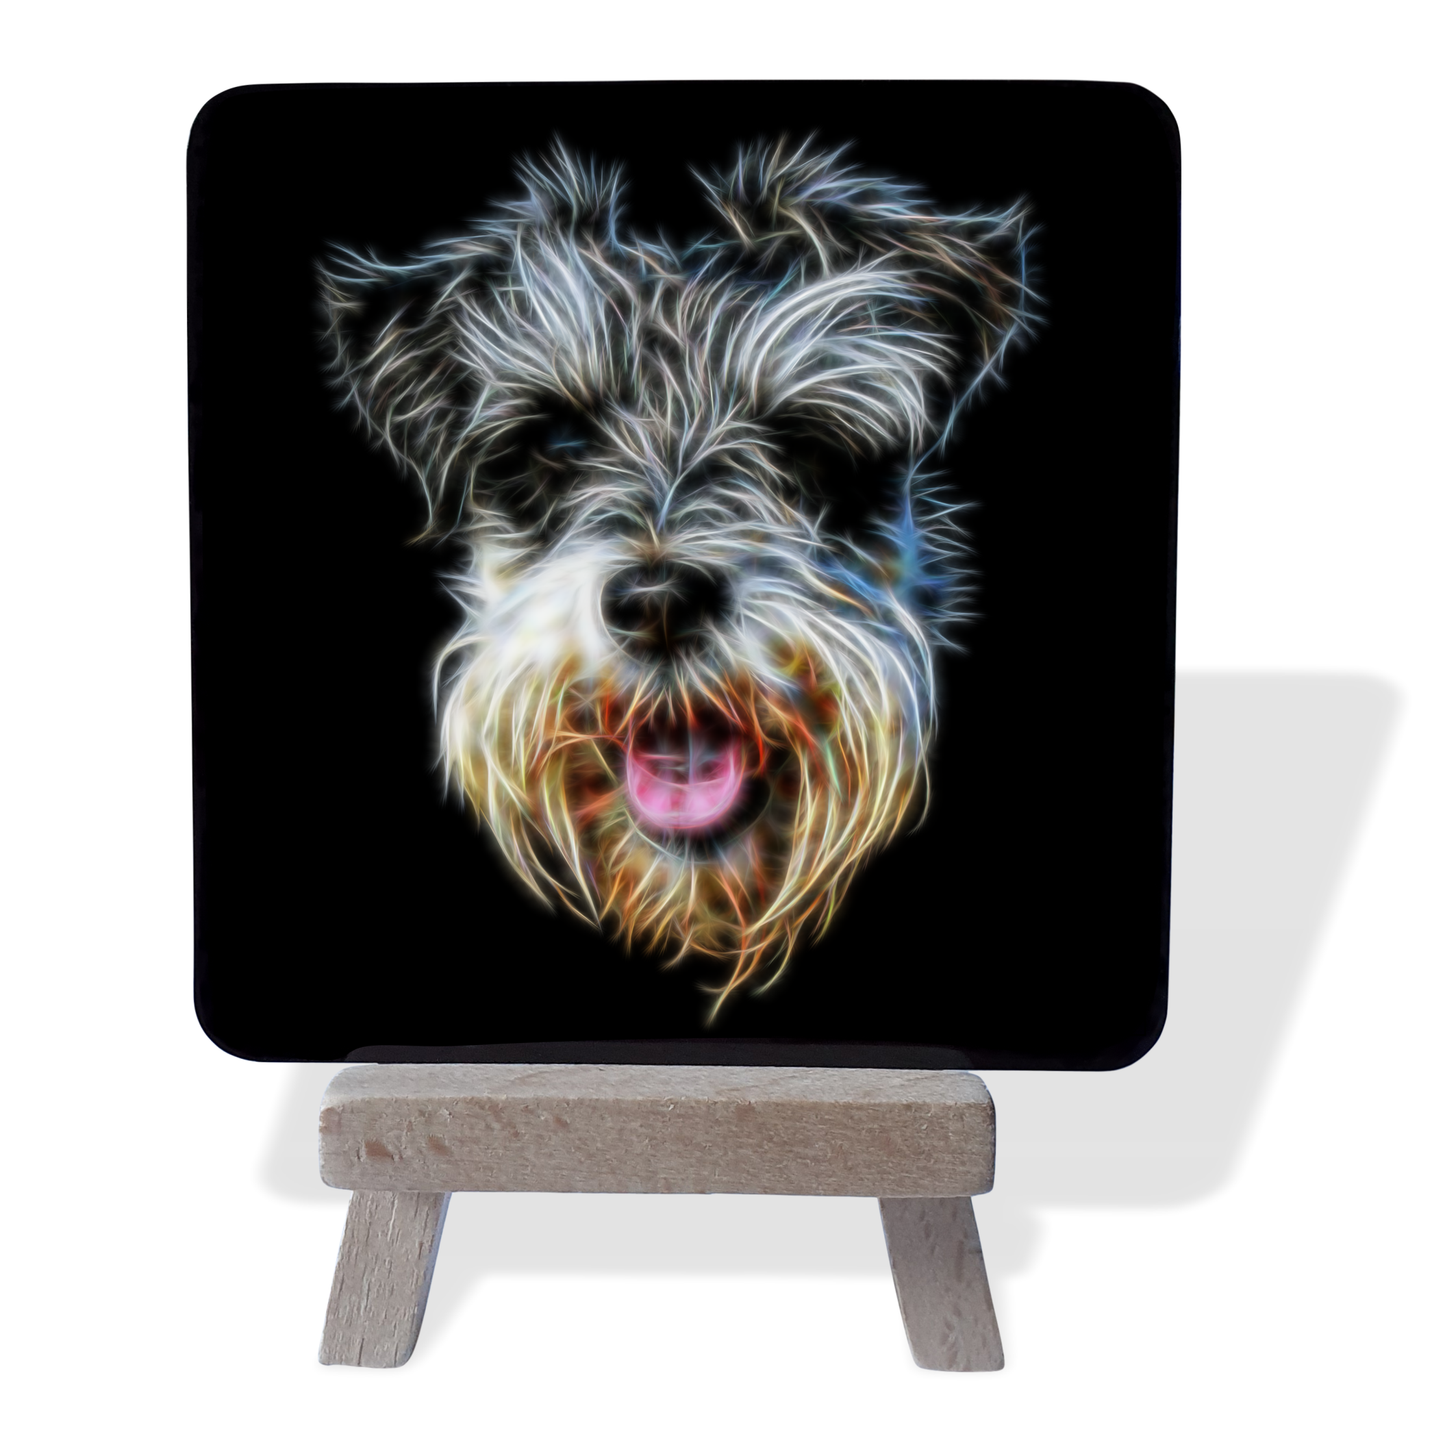 Schnauzer #1 Metal Plaque and Mini Easel with Fractal Art Design